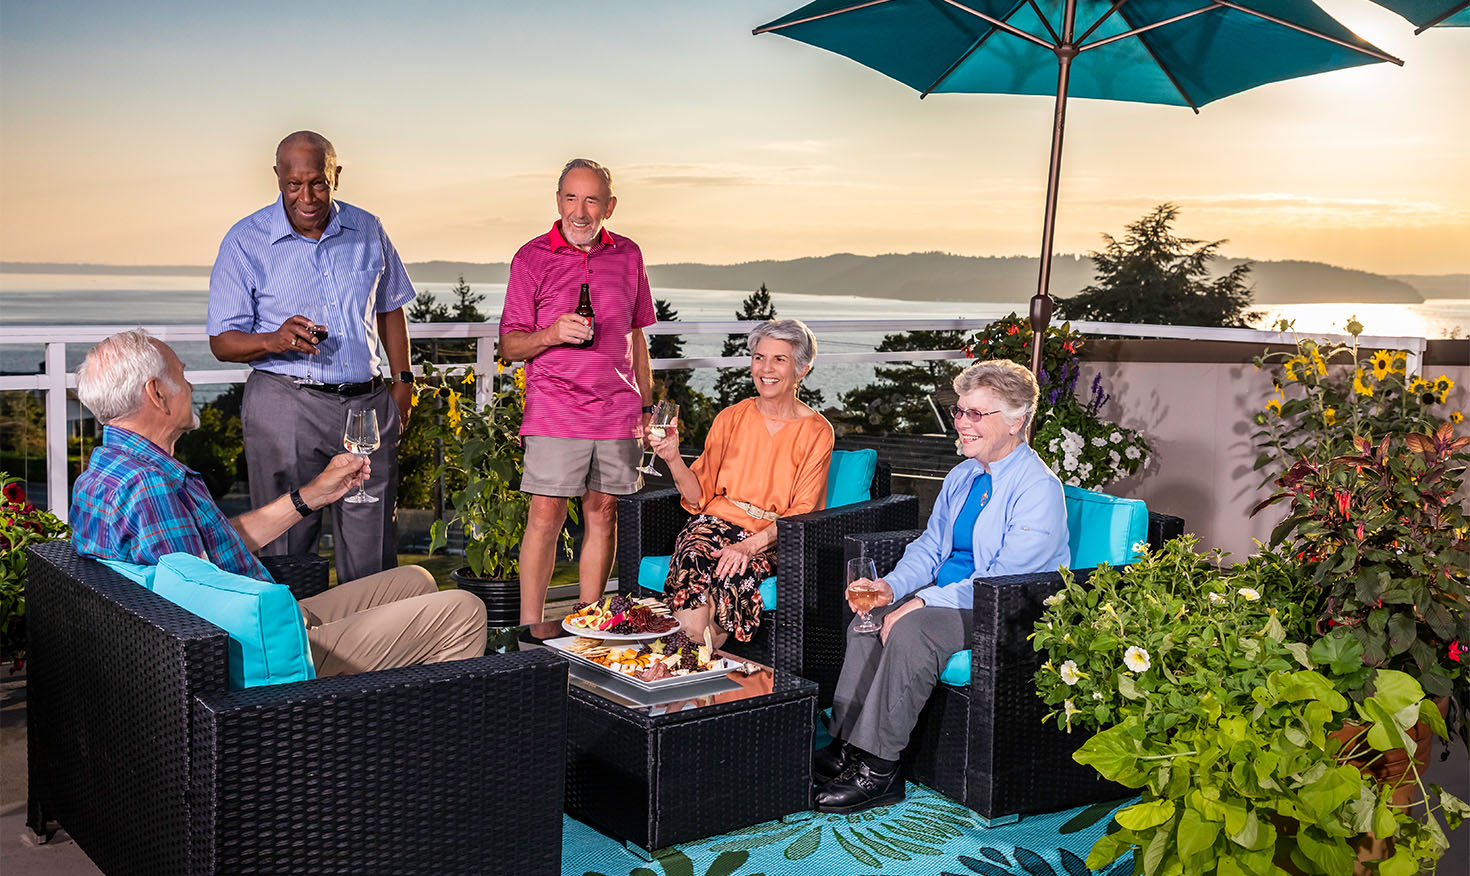 Group of five senior friends enjoying food and drinks on a balcony overlooking the Puget Sound